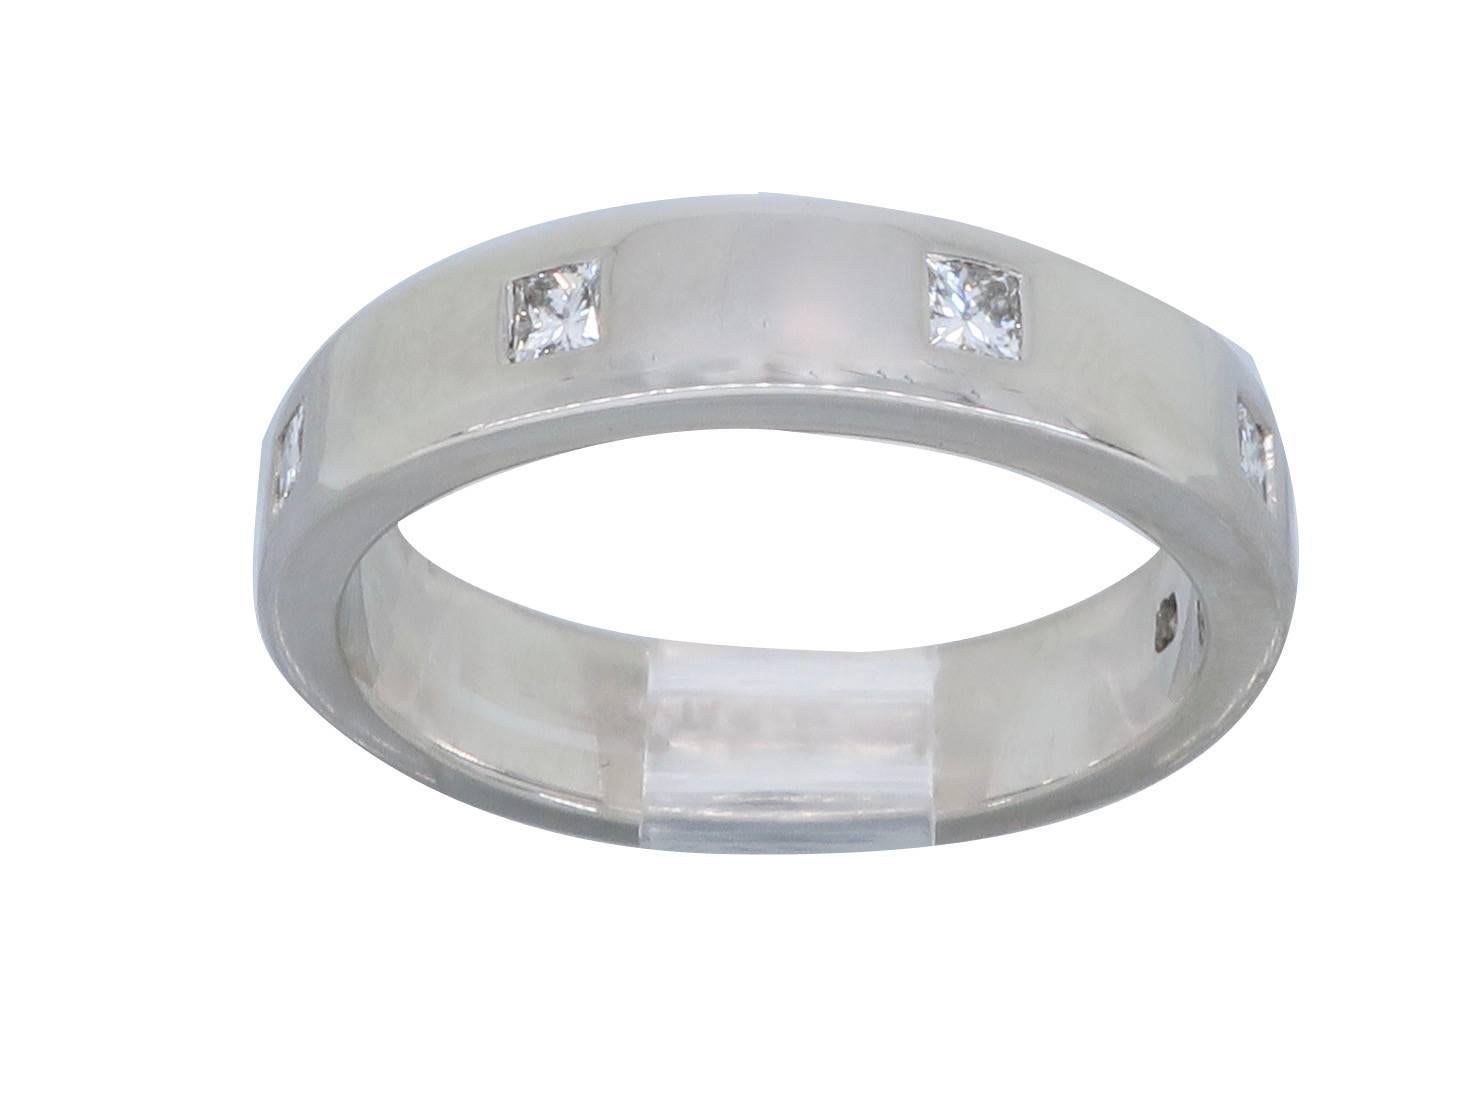 Platinum band features 5 stunning Princess Cut Diamonds. The diamonds display H-I color and VS-SI clarity. There is approximately .30CTW of diamonds in this beautiful band. The band is currently a size 6.25 and weighs 8.4 grams. The band is stamped